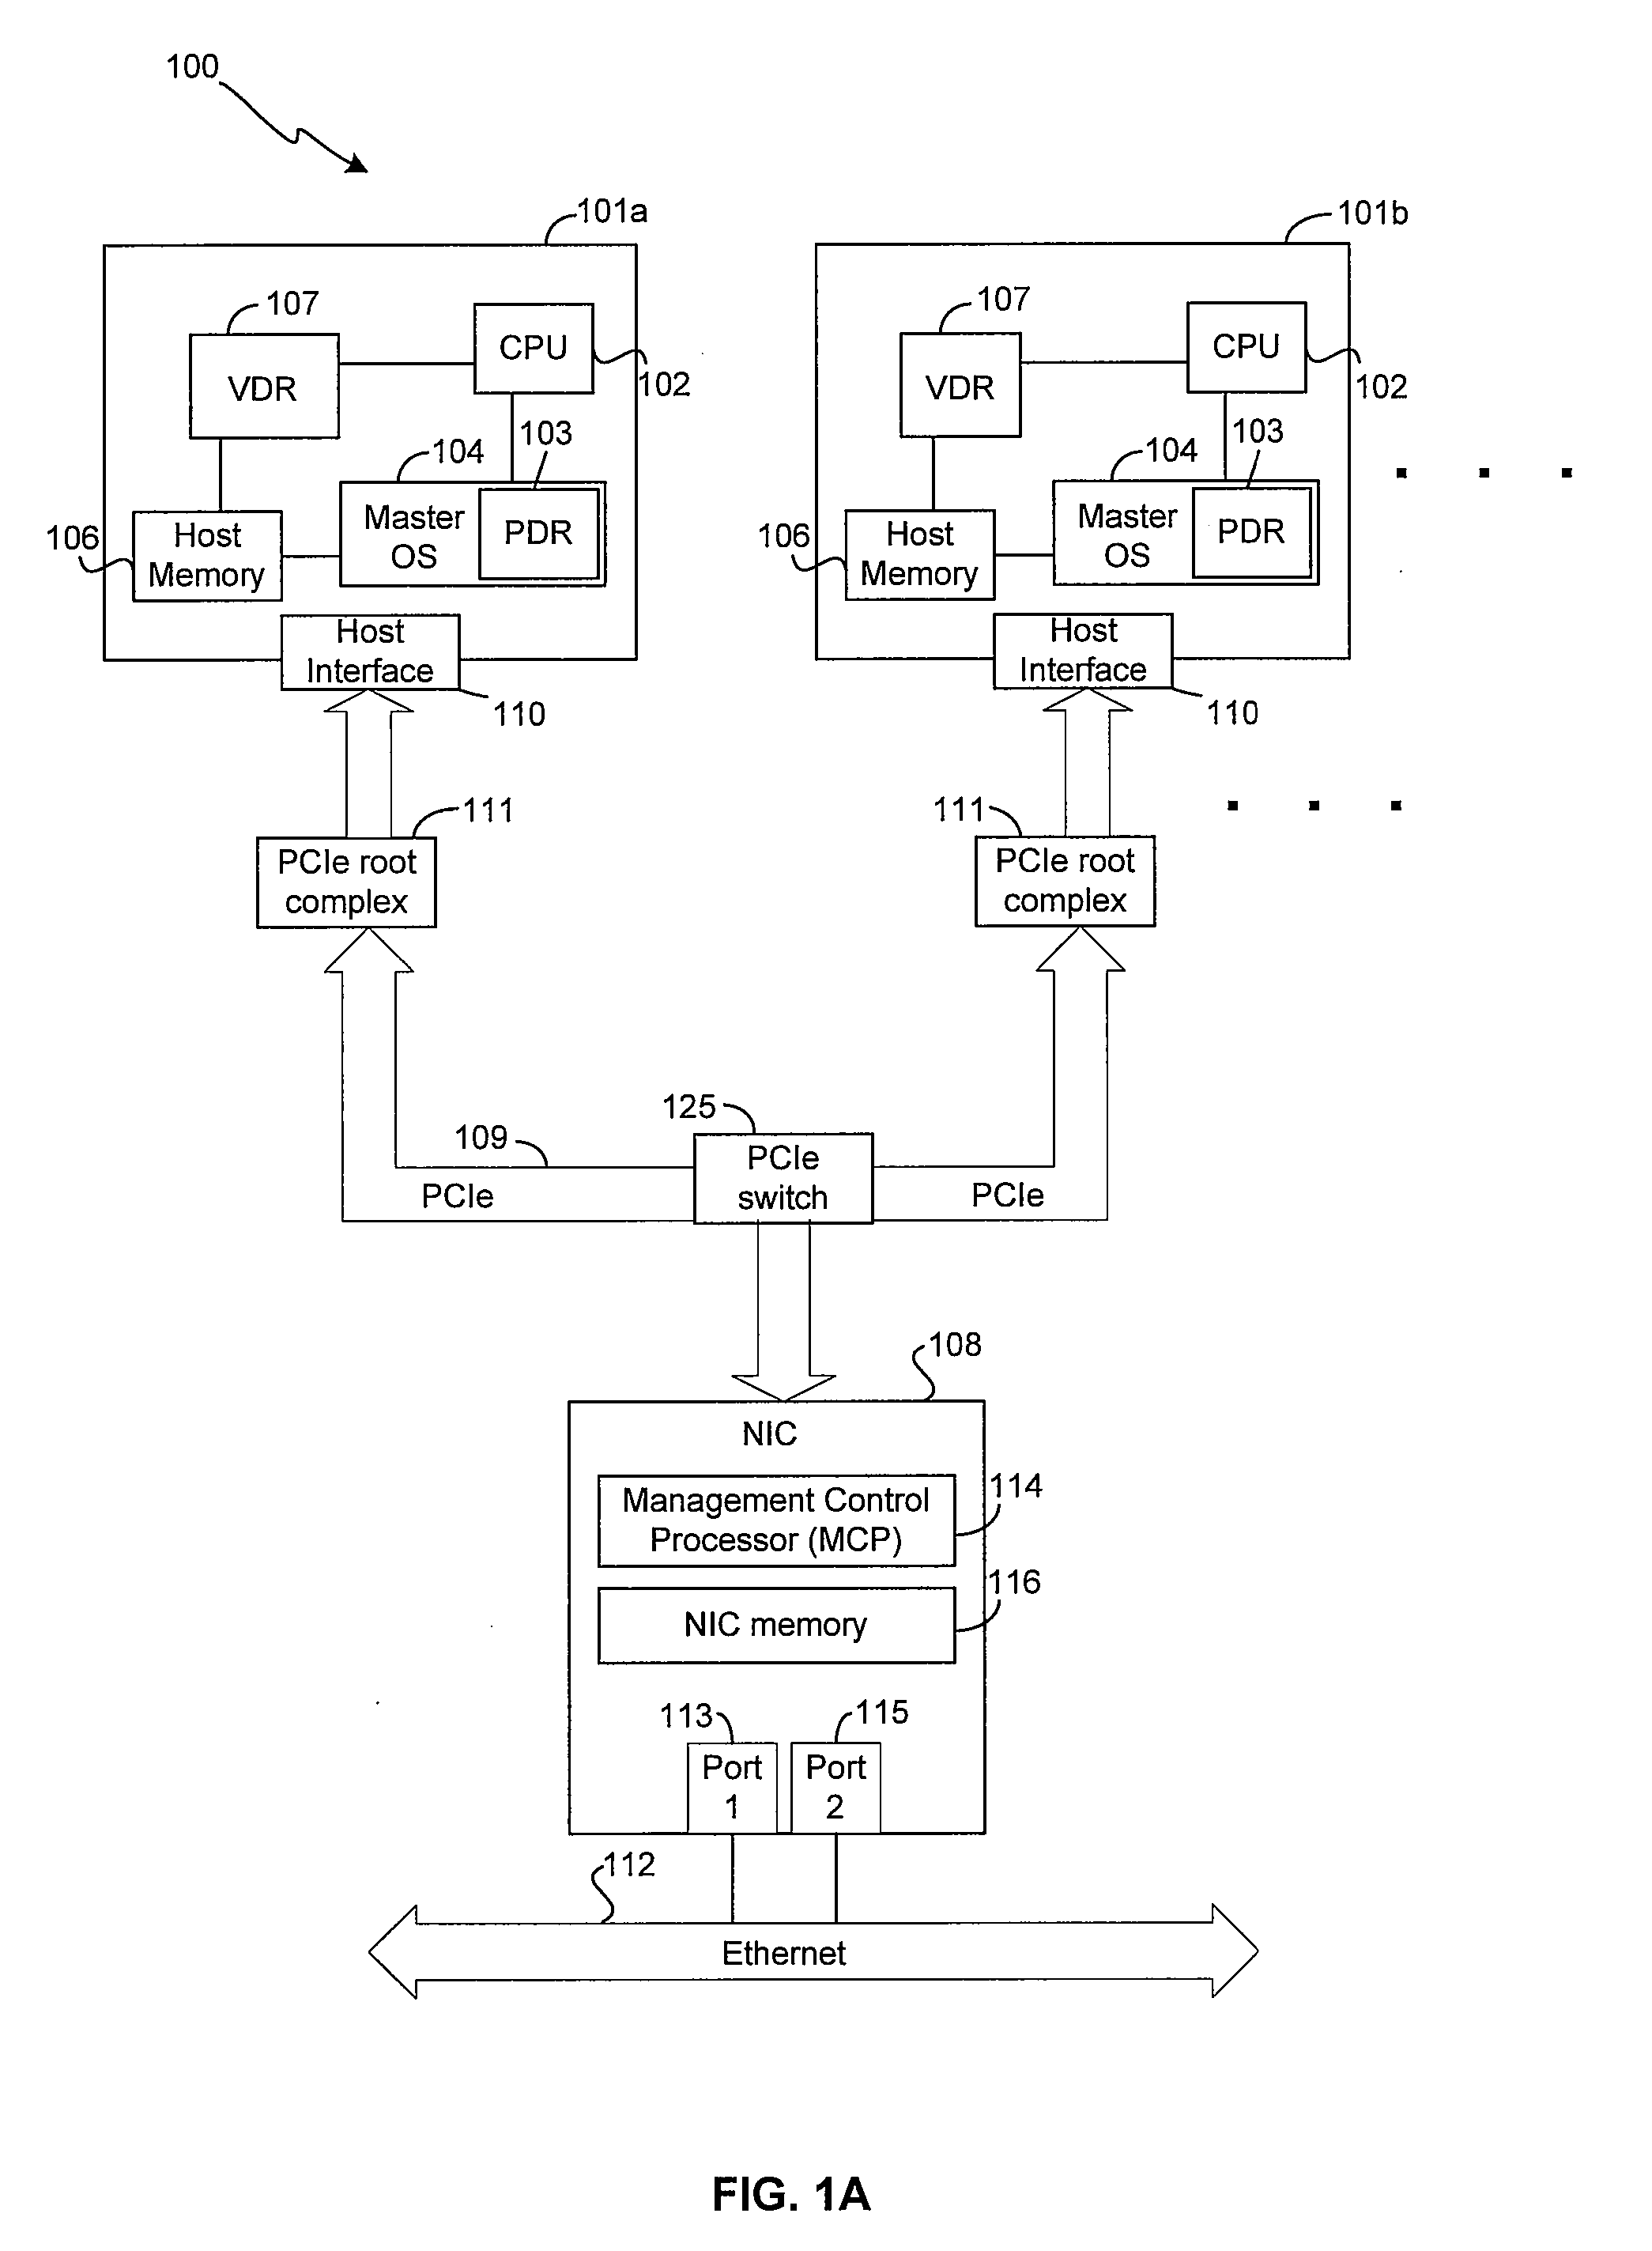 Method and system for configuring a plurality of network interfaces that share a physical interface